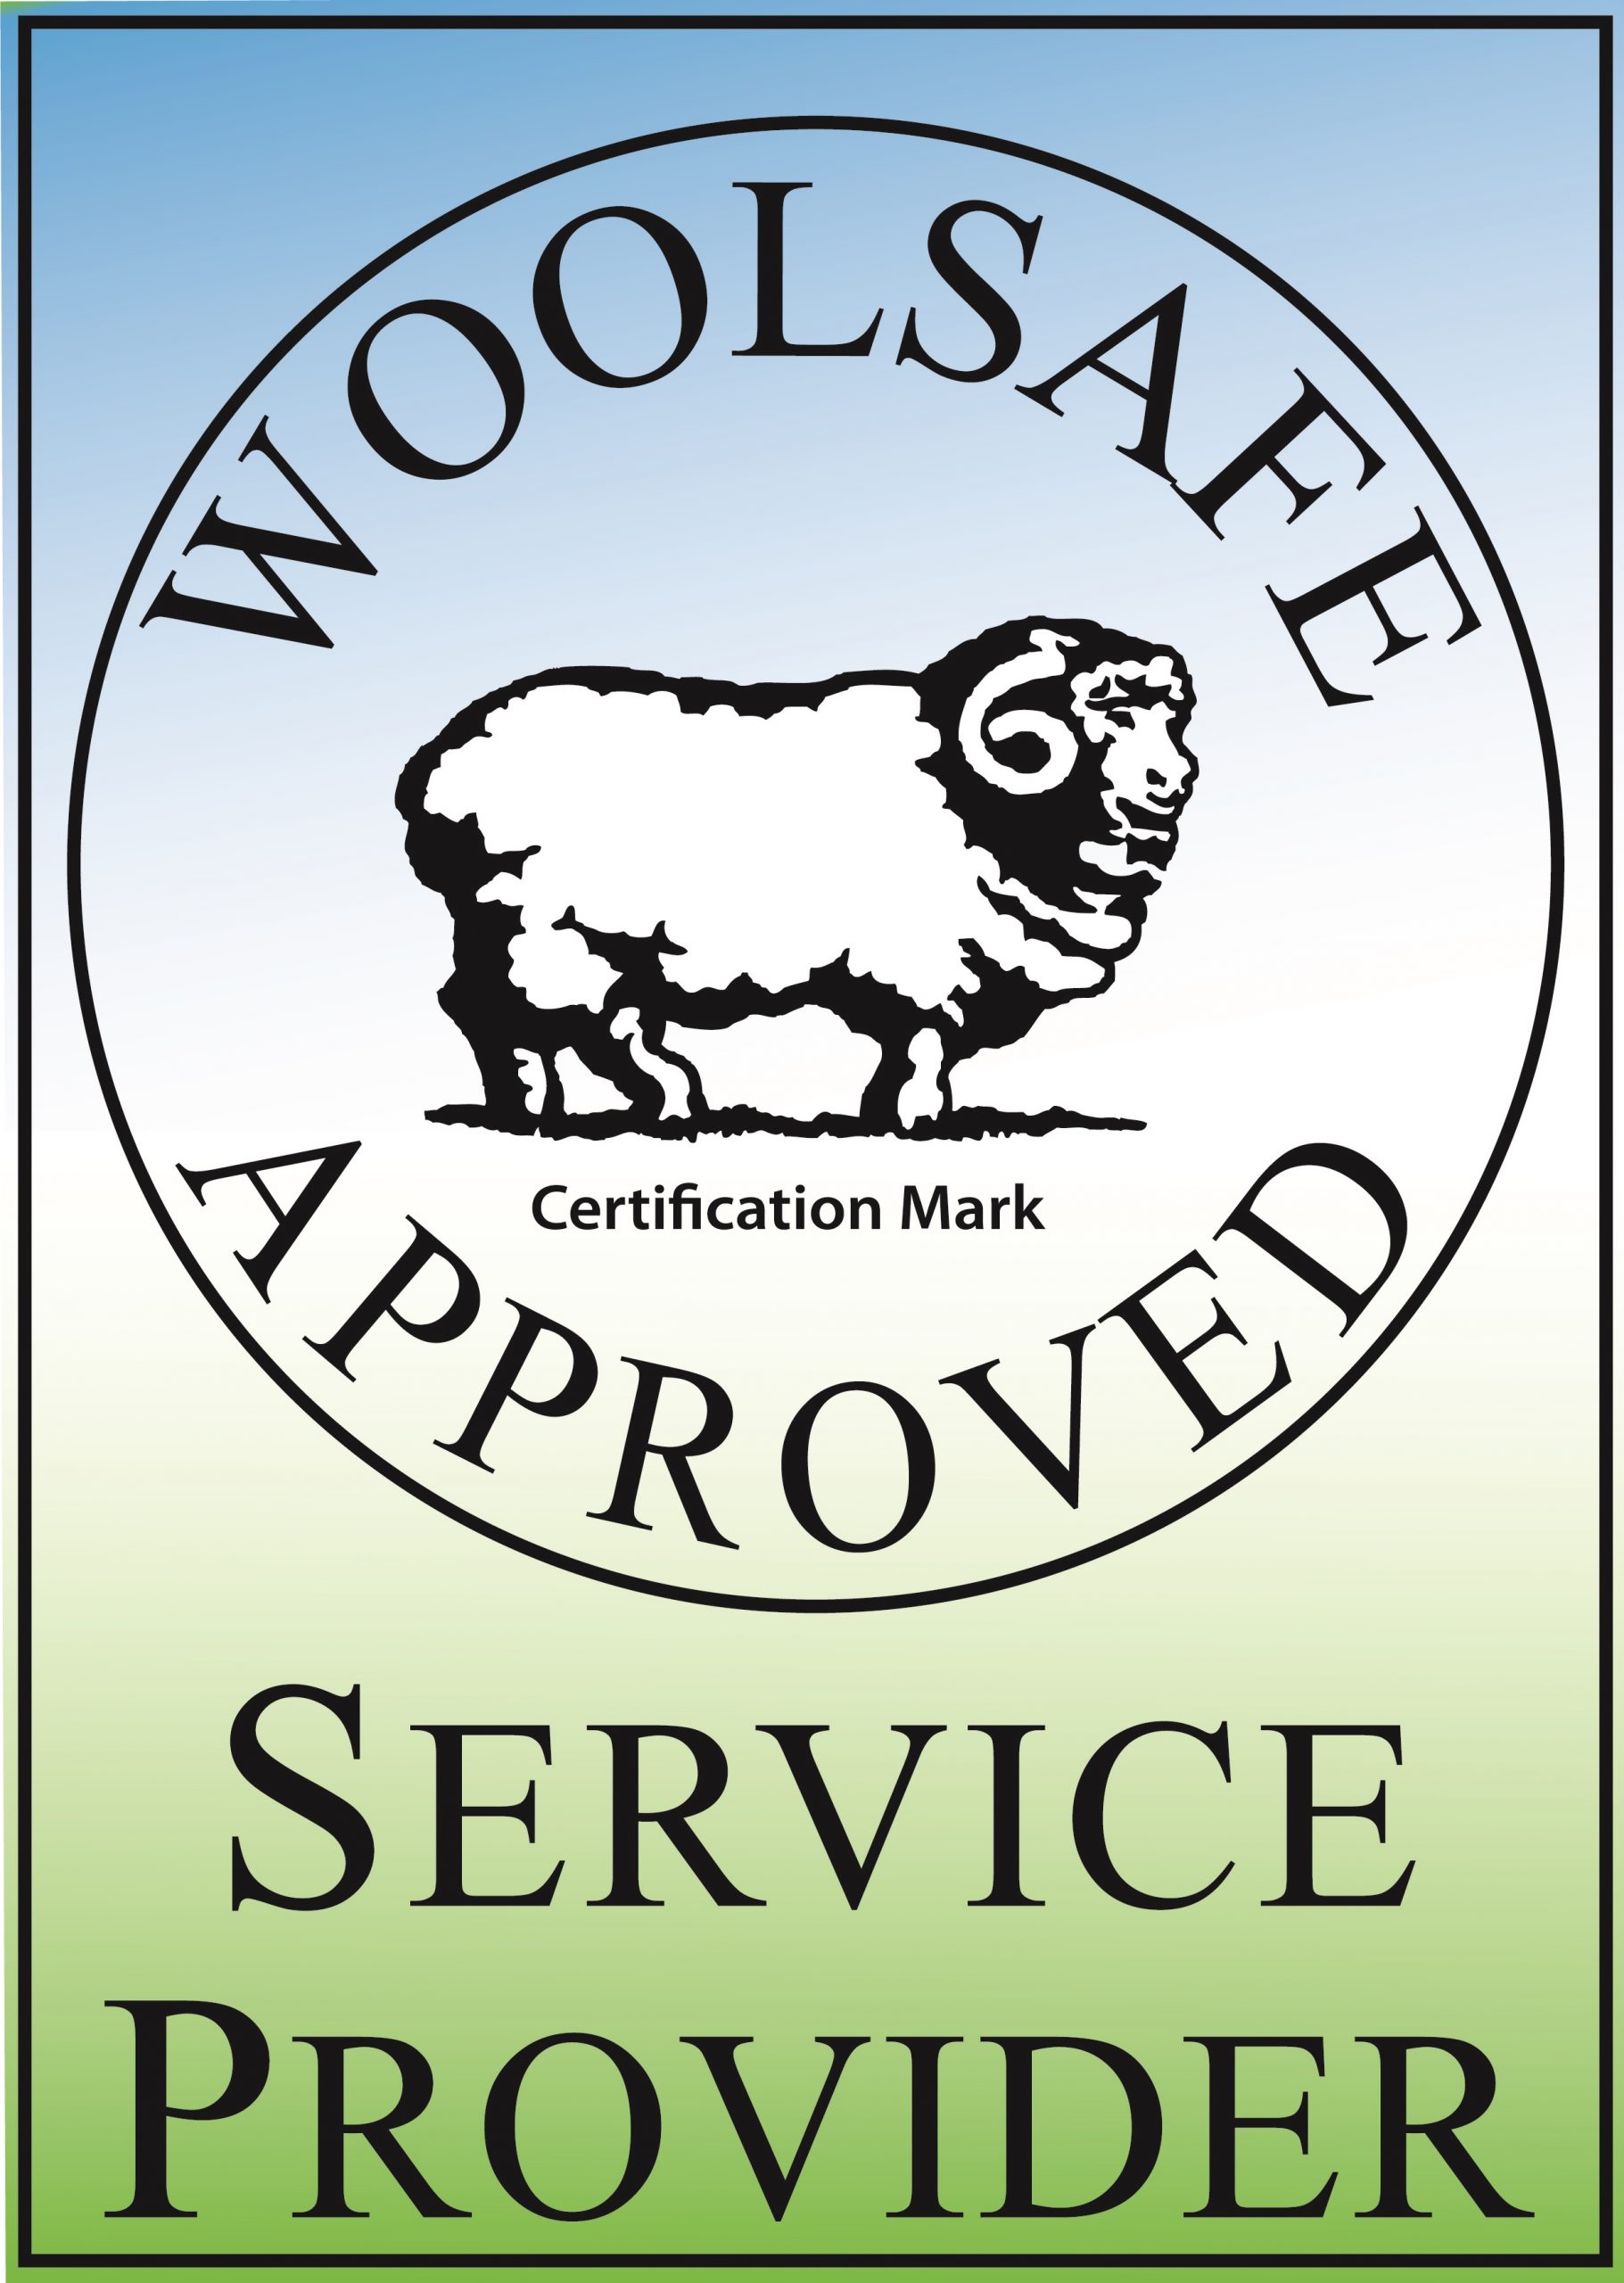 Wooolsafe Approved Service Provider